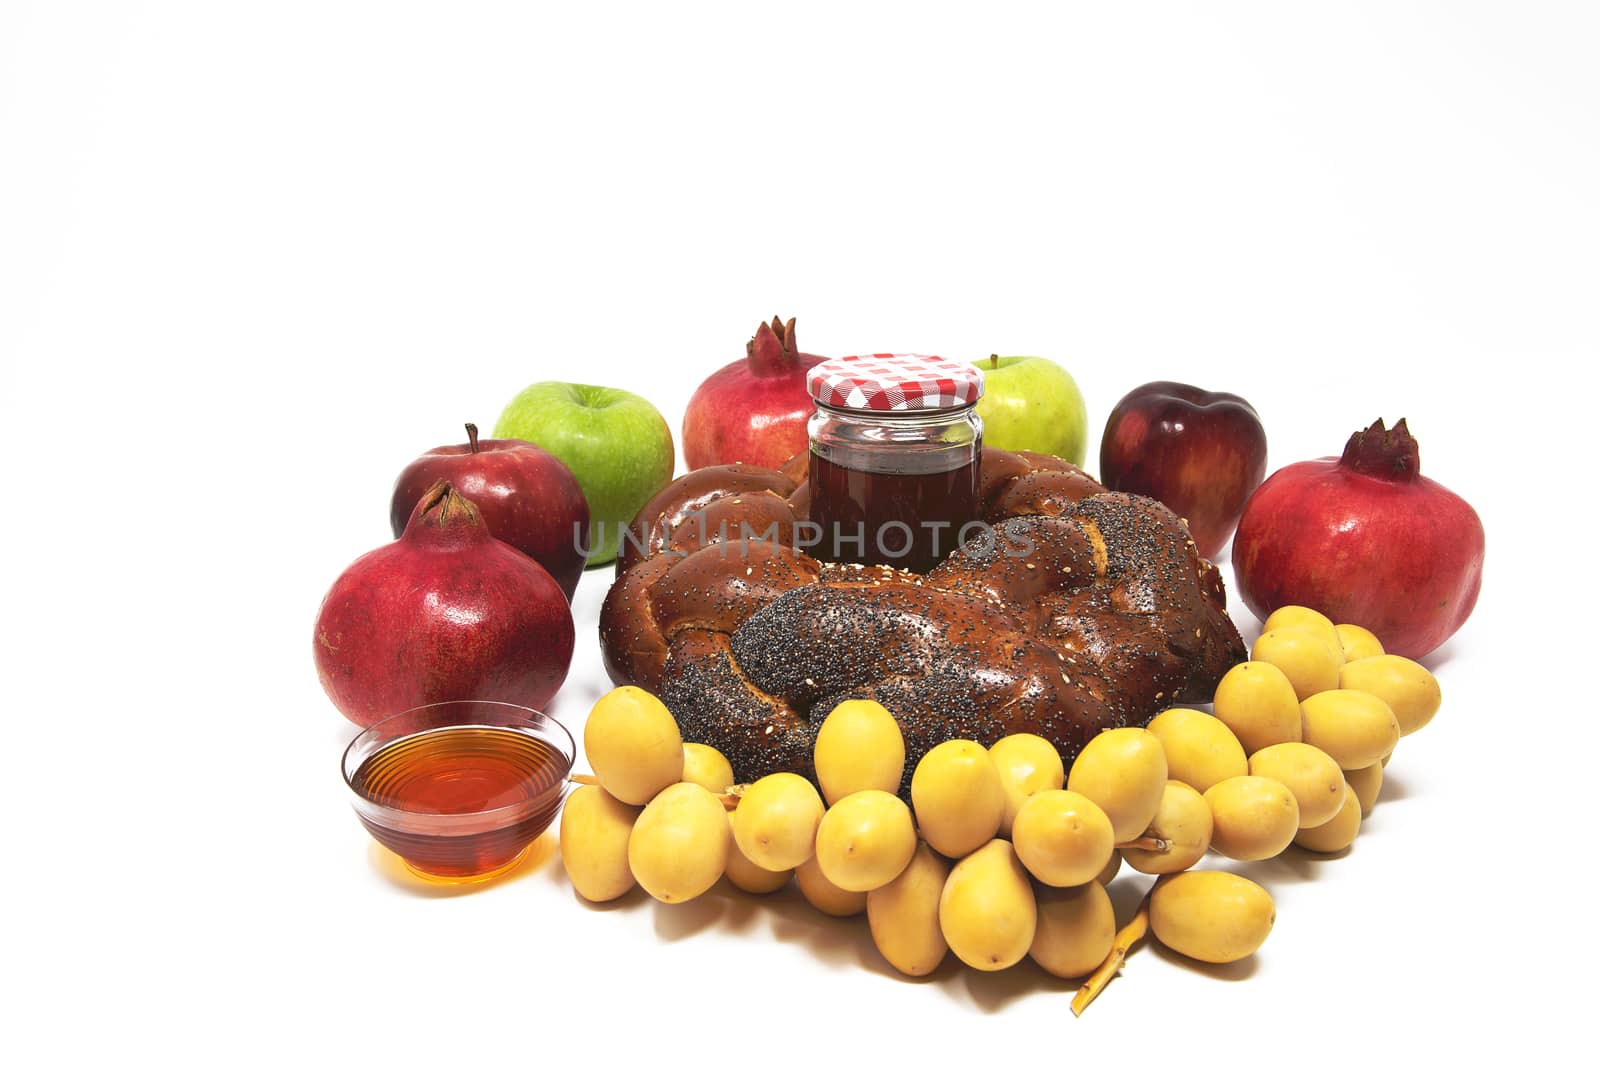 Rosh Hashanah, Jewish New Year, Traditional Symbols, Honey in a glass jar, Pomegranates, Dates, Red And Green Apples, Challah Bread. Isolated On A White Background